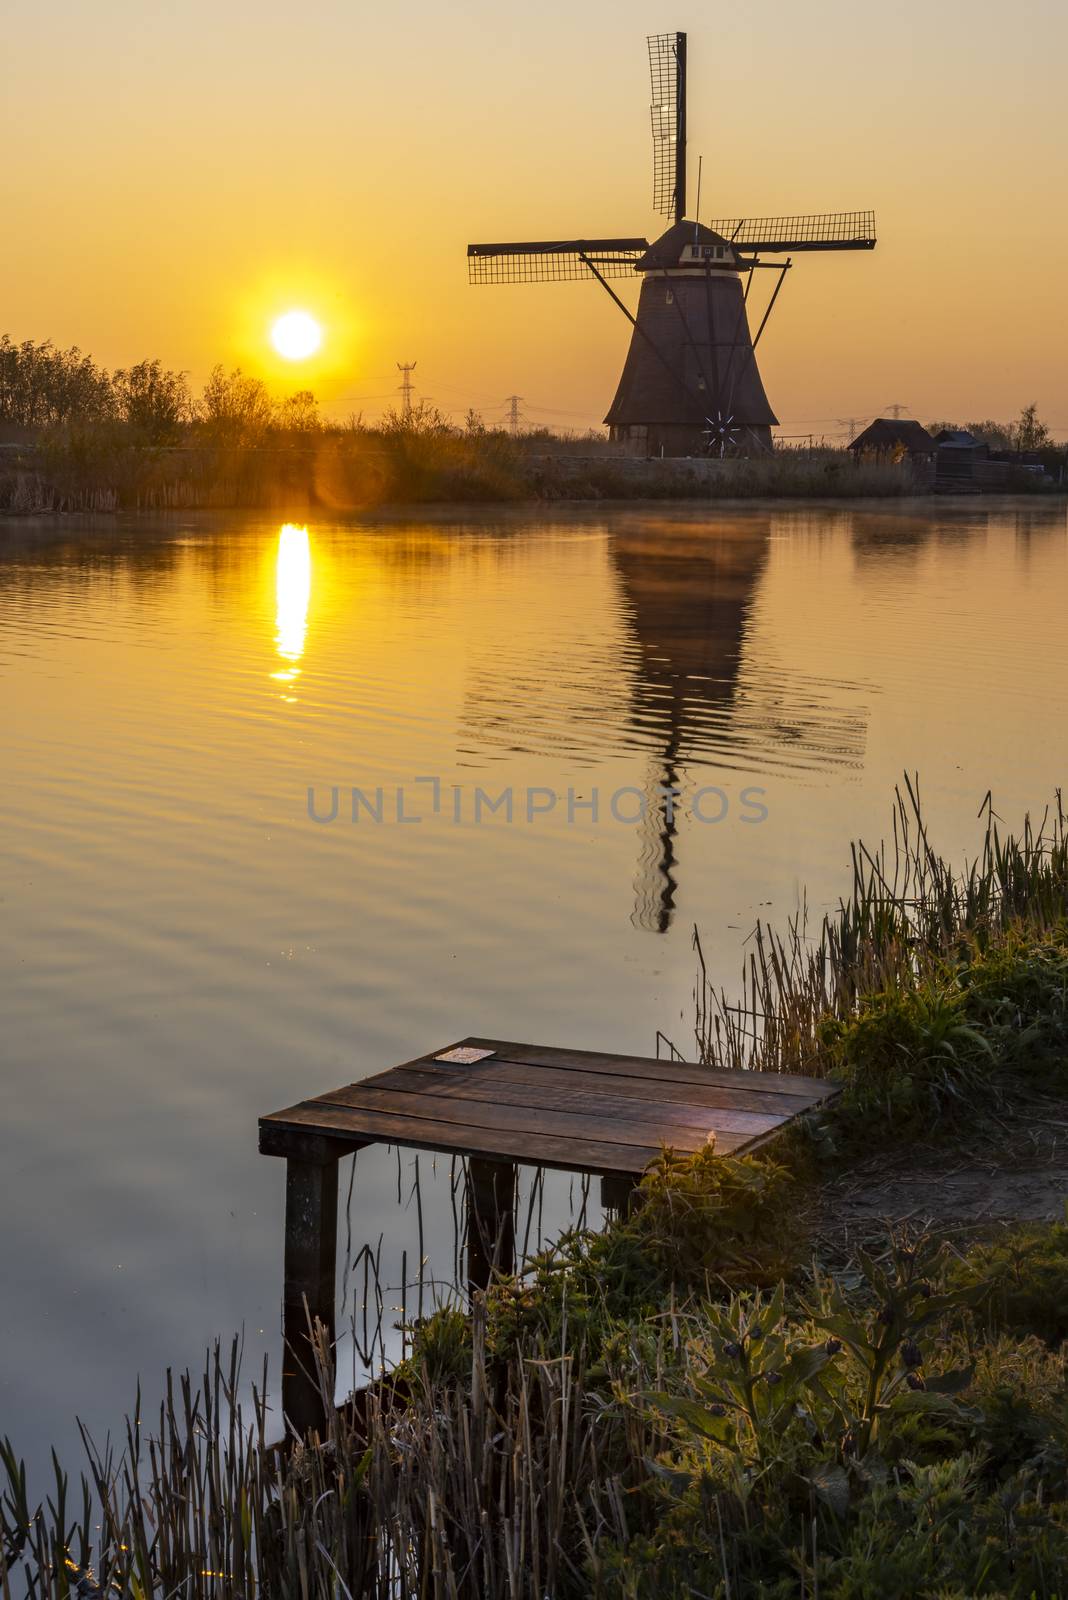 Embarquement at the edge with the calm water in the long canal during facing a windmill reflection in the burning sunrise color morning